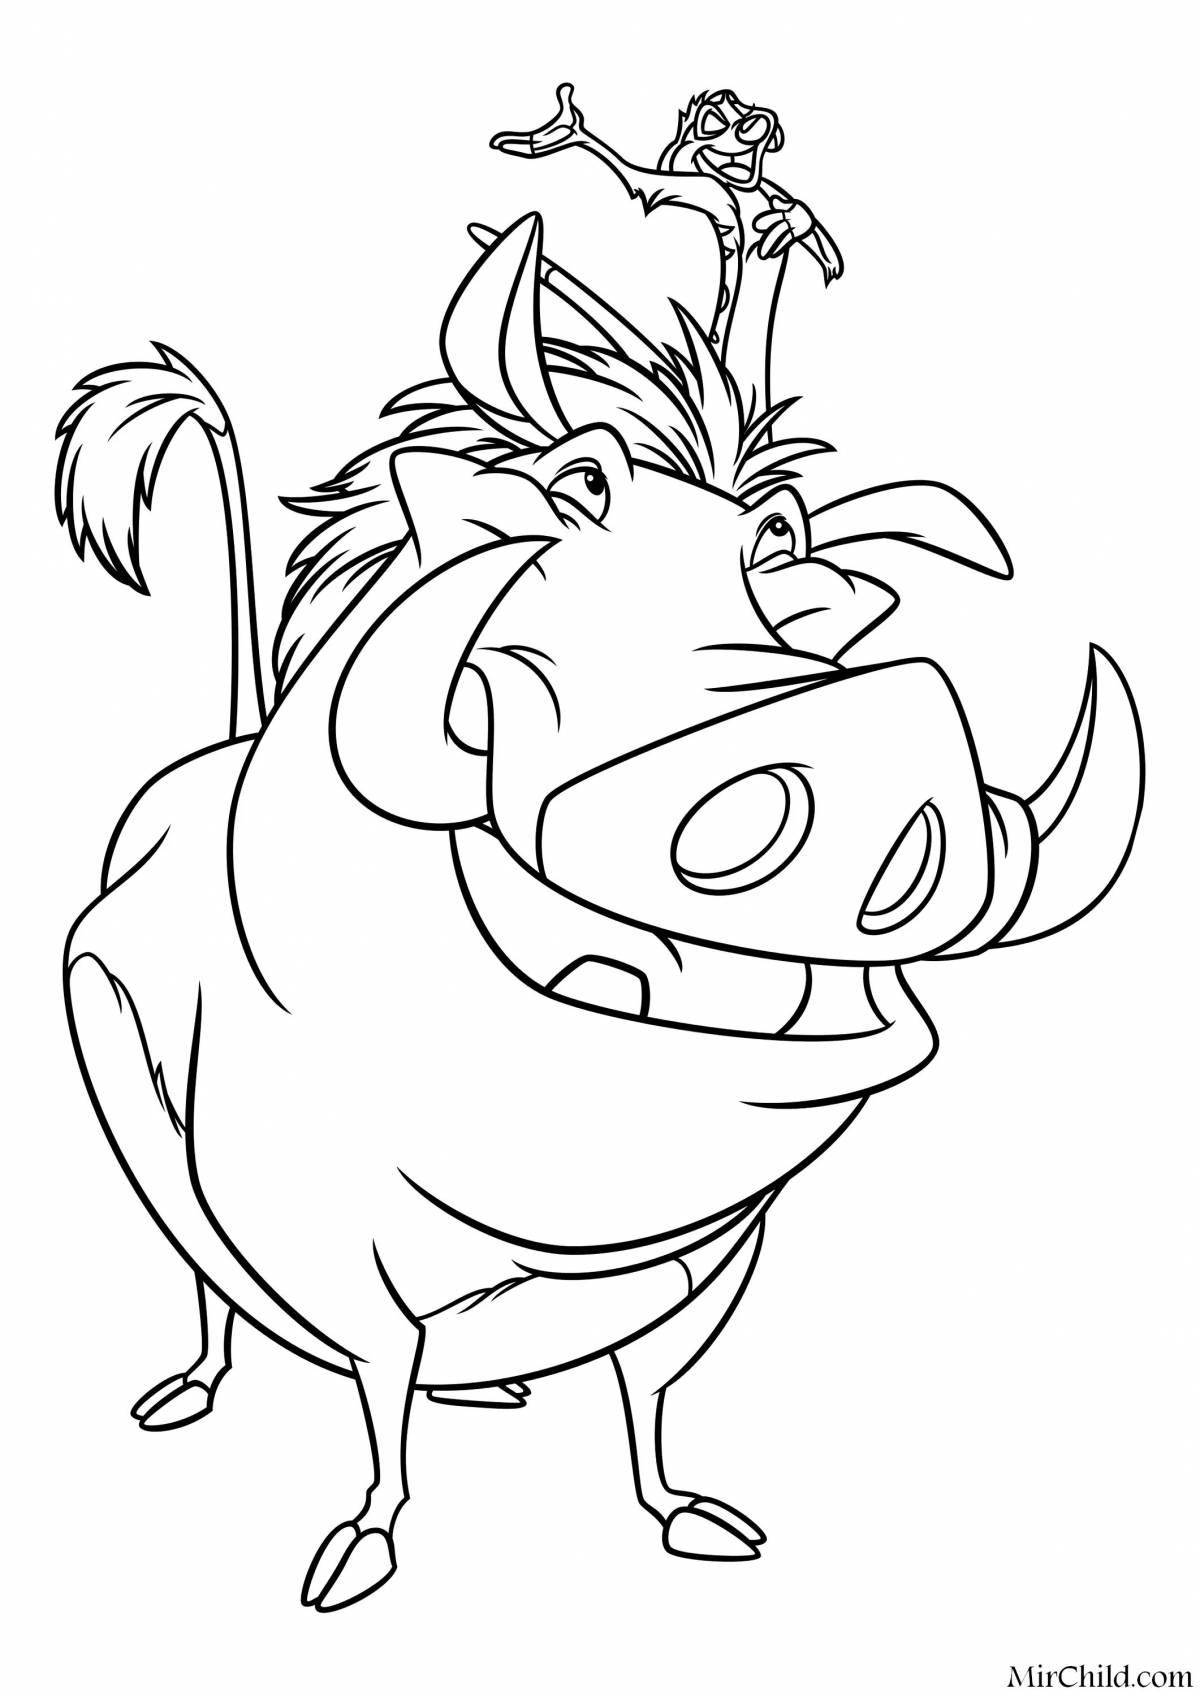 Exciting timon and pumbaa coloring book